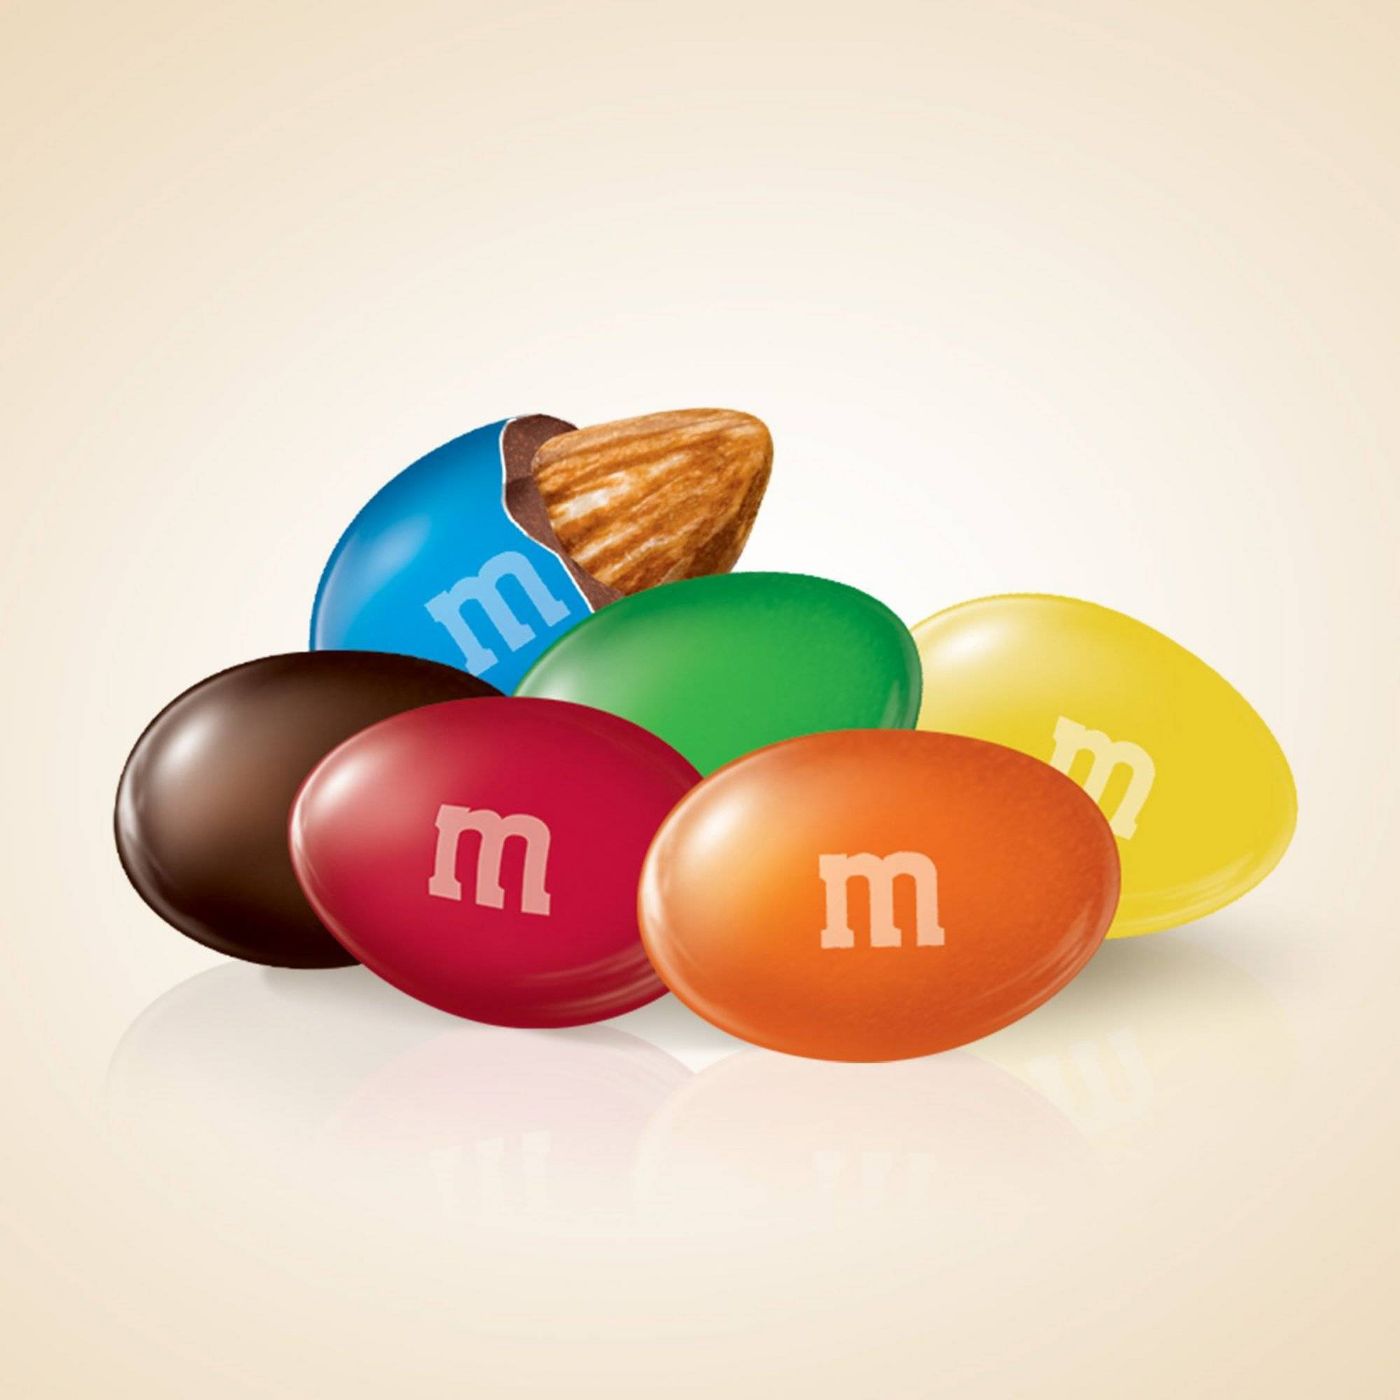 sharing size m&ms